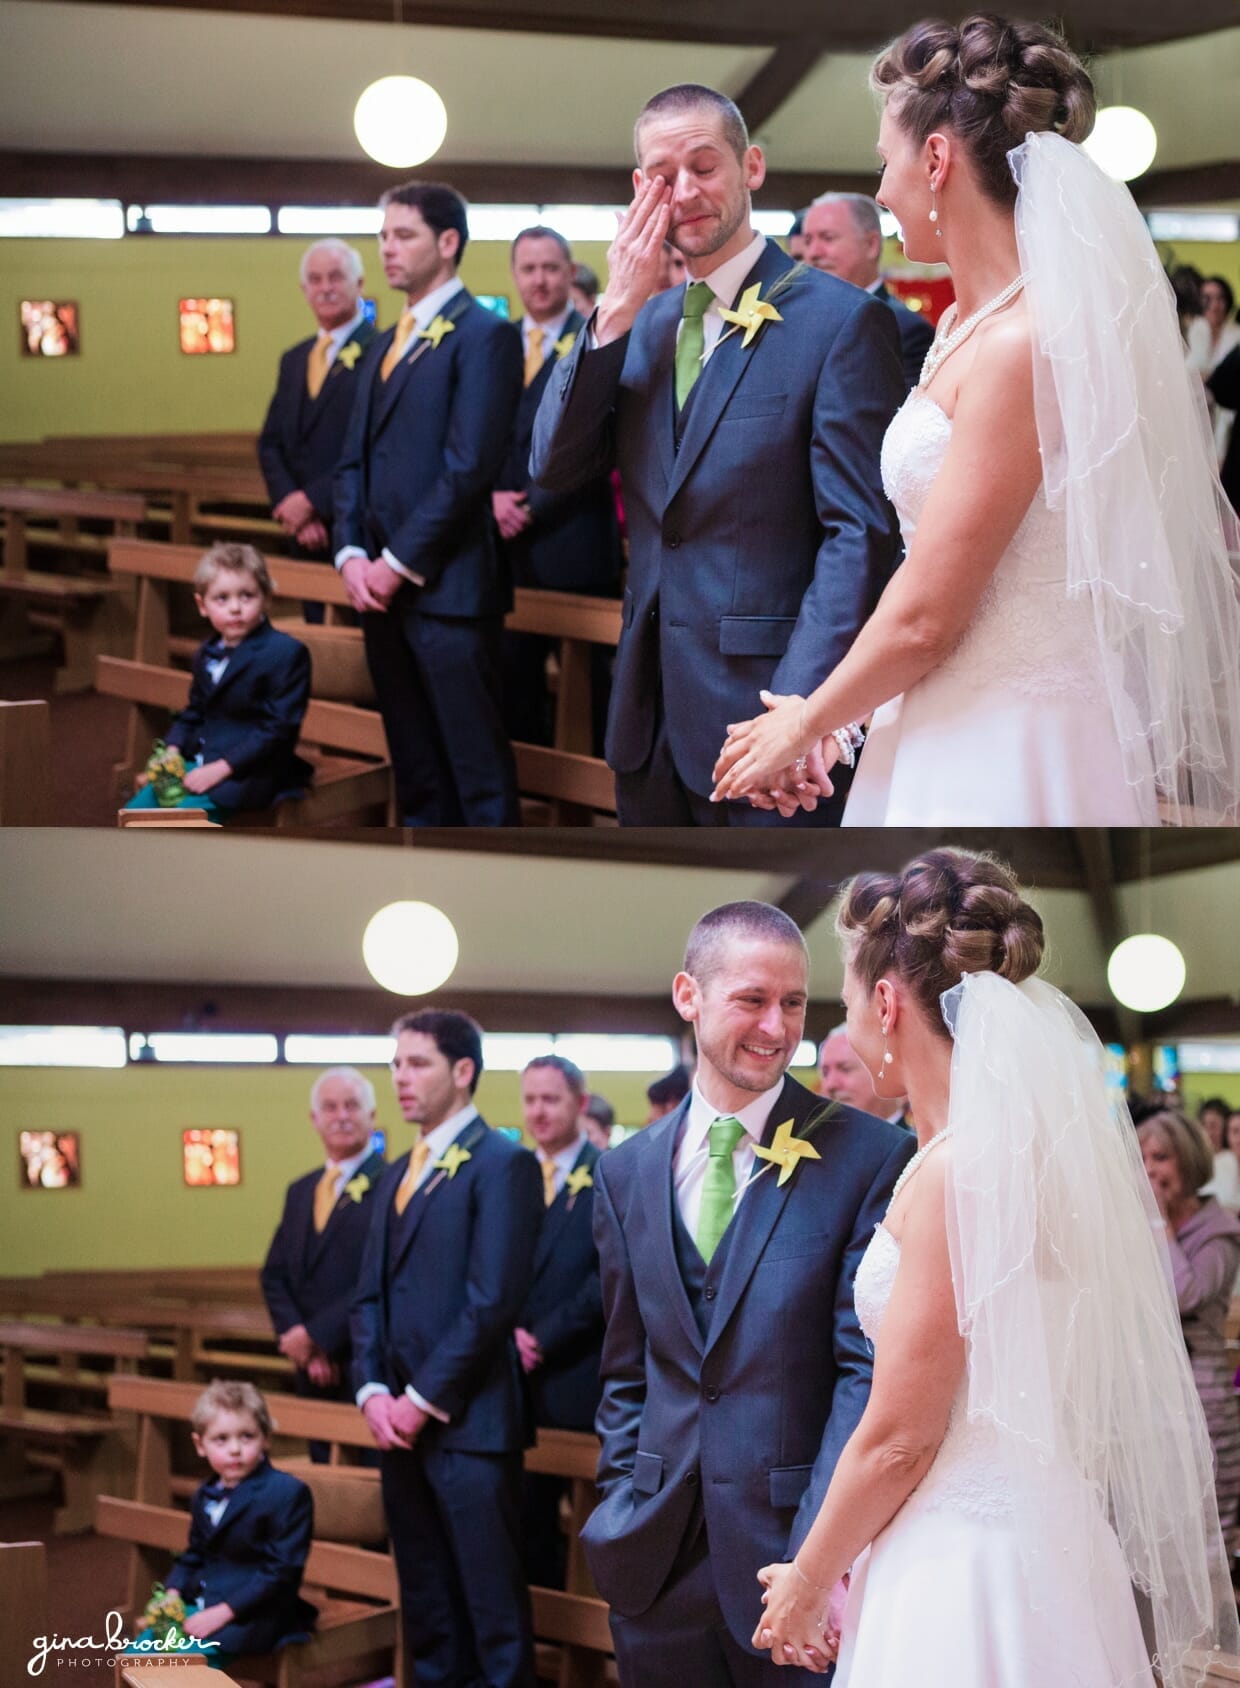 The groom wipes away a tear after seeing his beautiful bride walk up the aisle